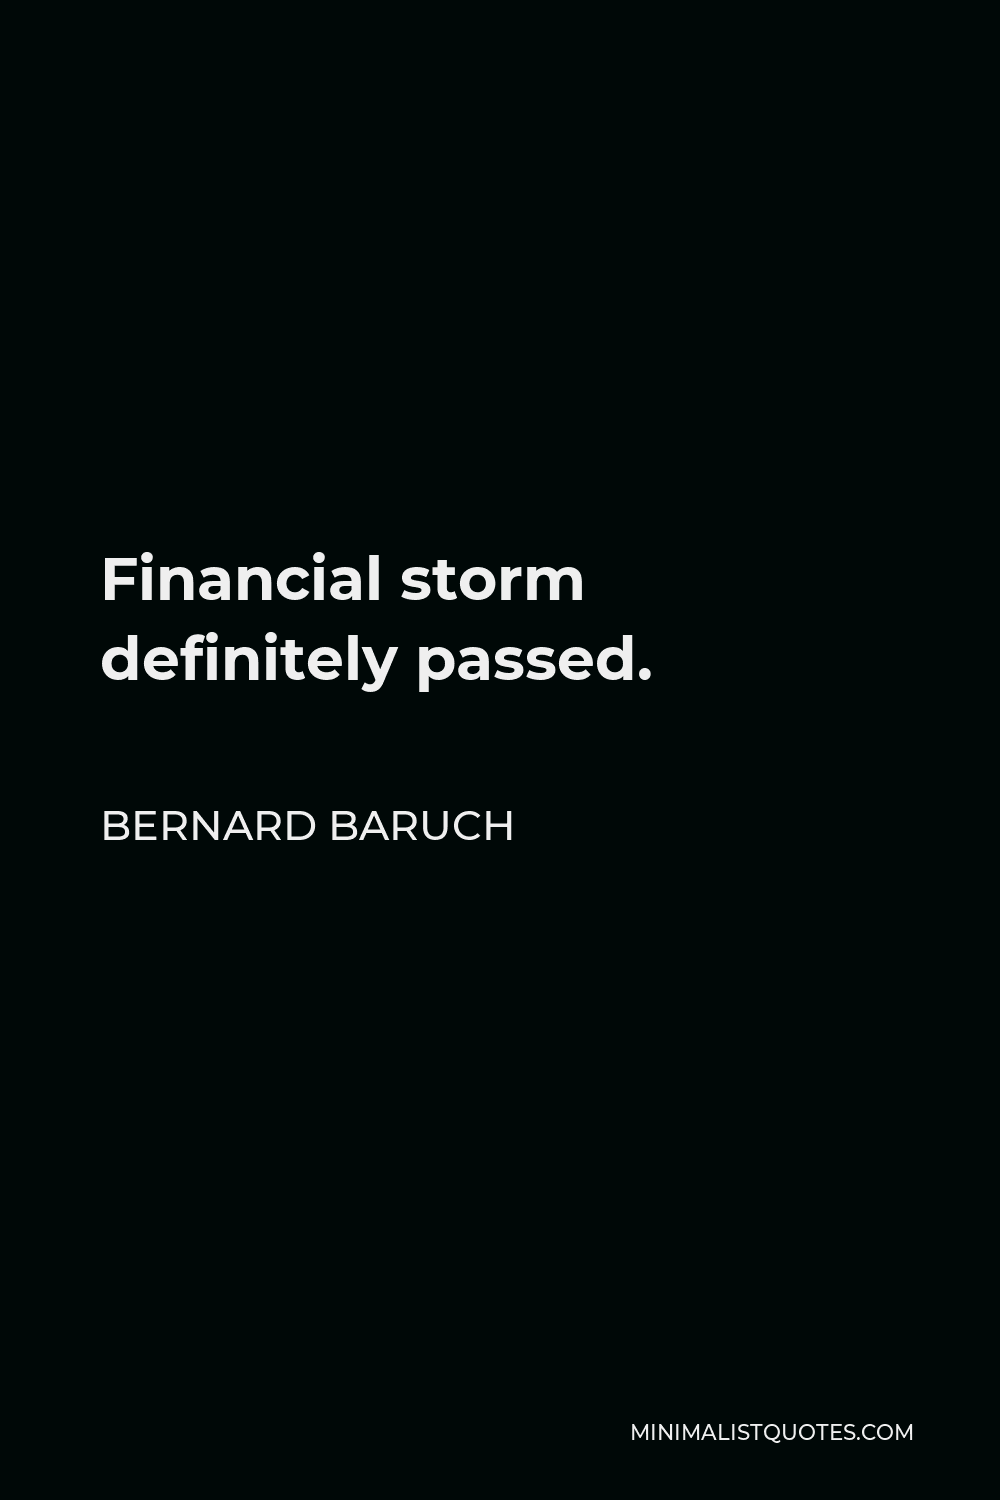 Bernard Baruch Quote - Financial storm definitely passed.